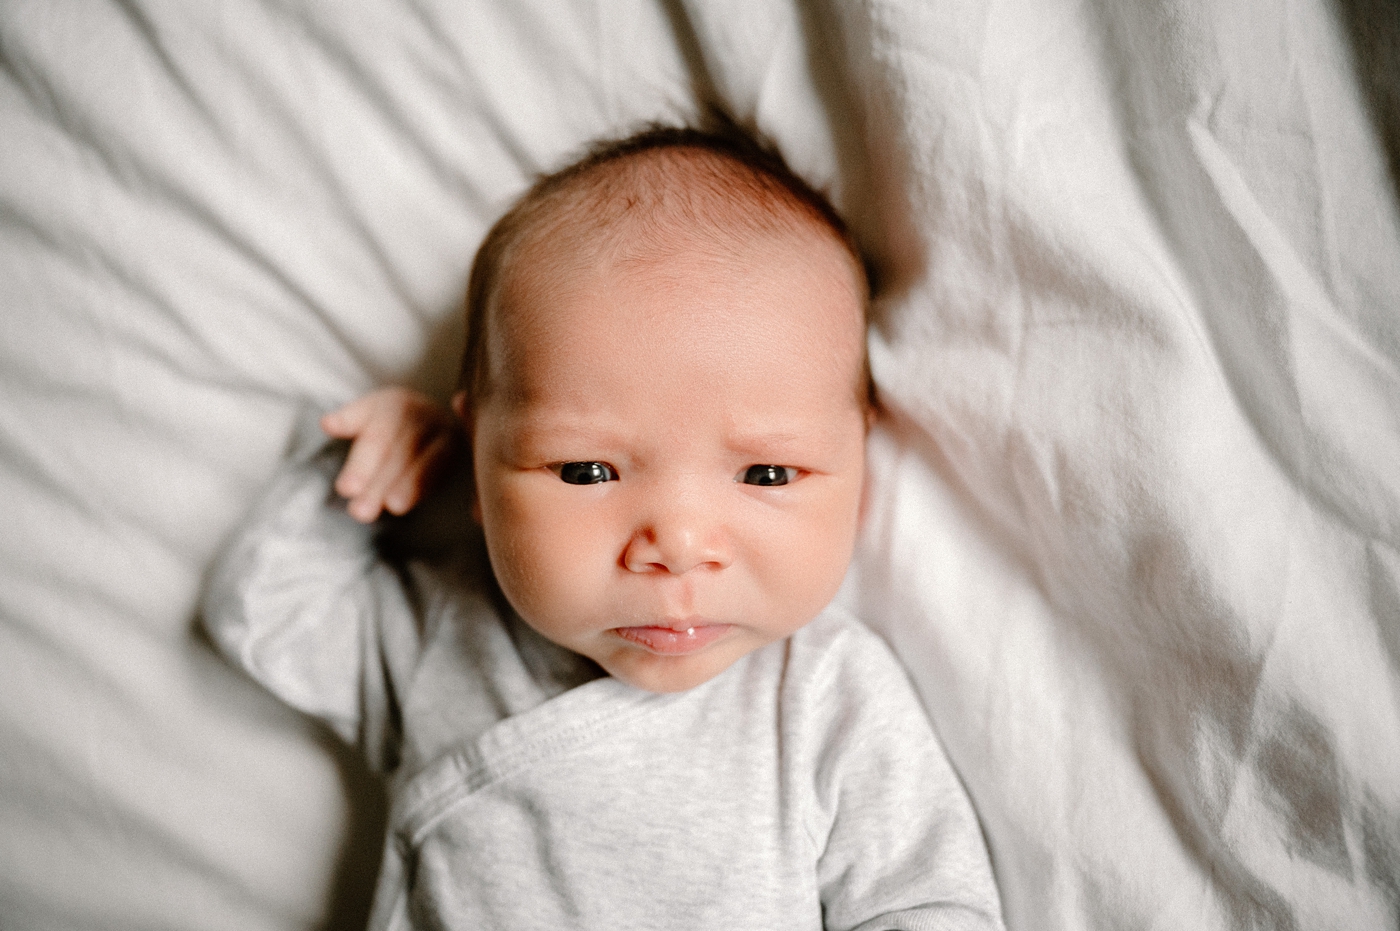 Baby boy looks directly at the camera lens. Photo by Meg Newton Photography.